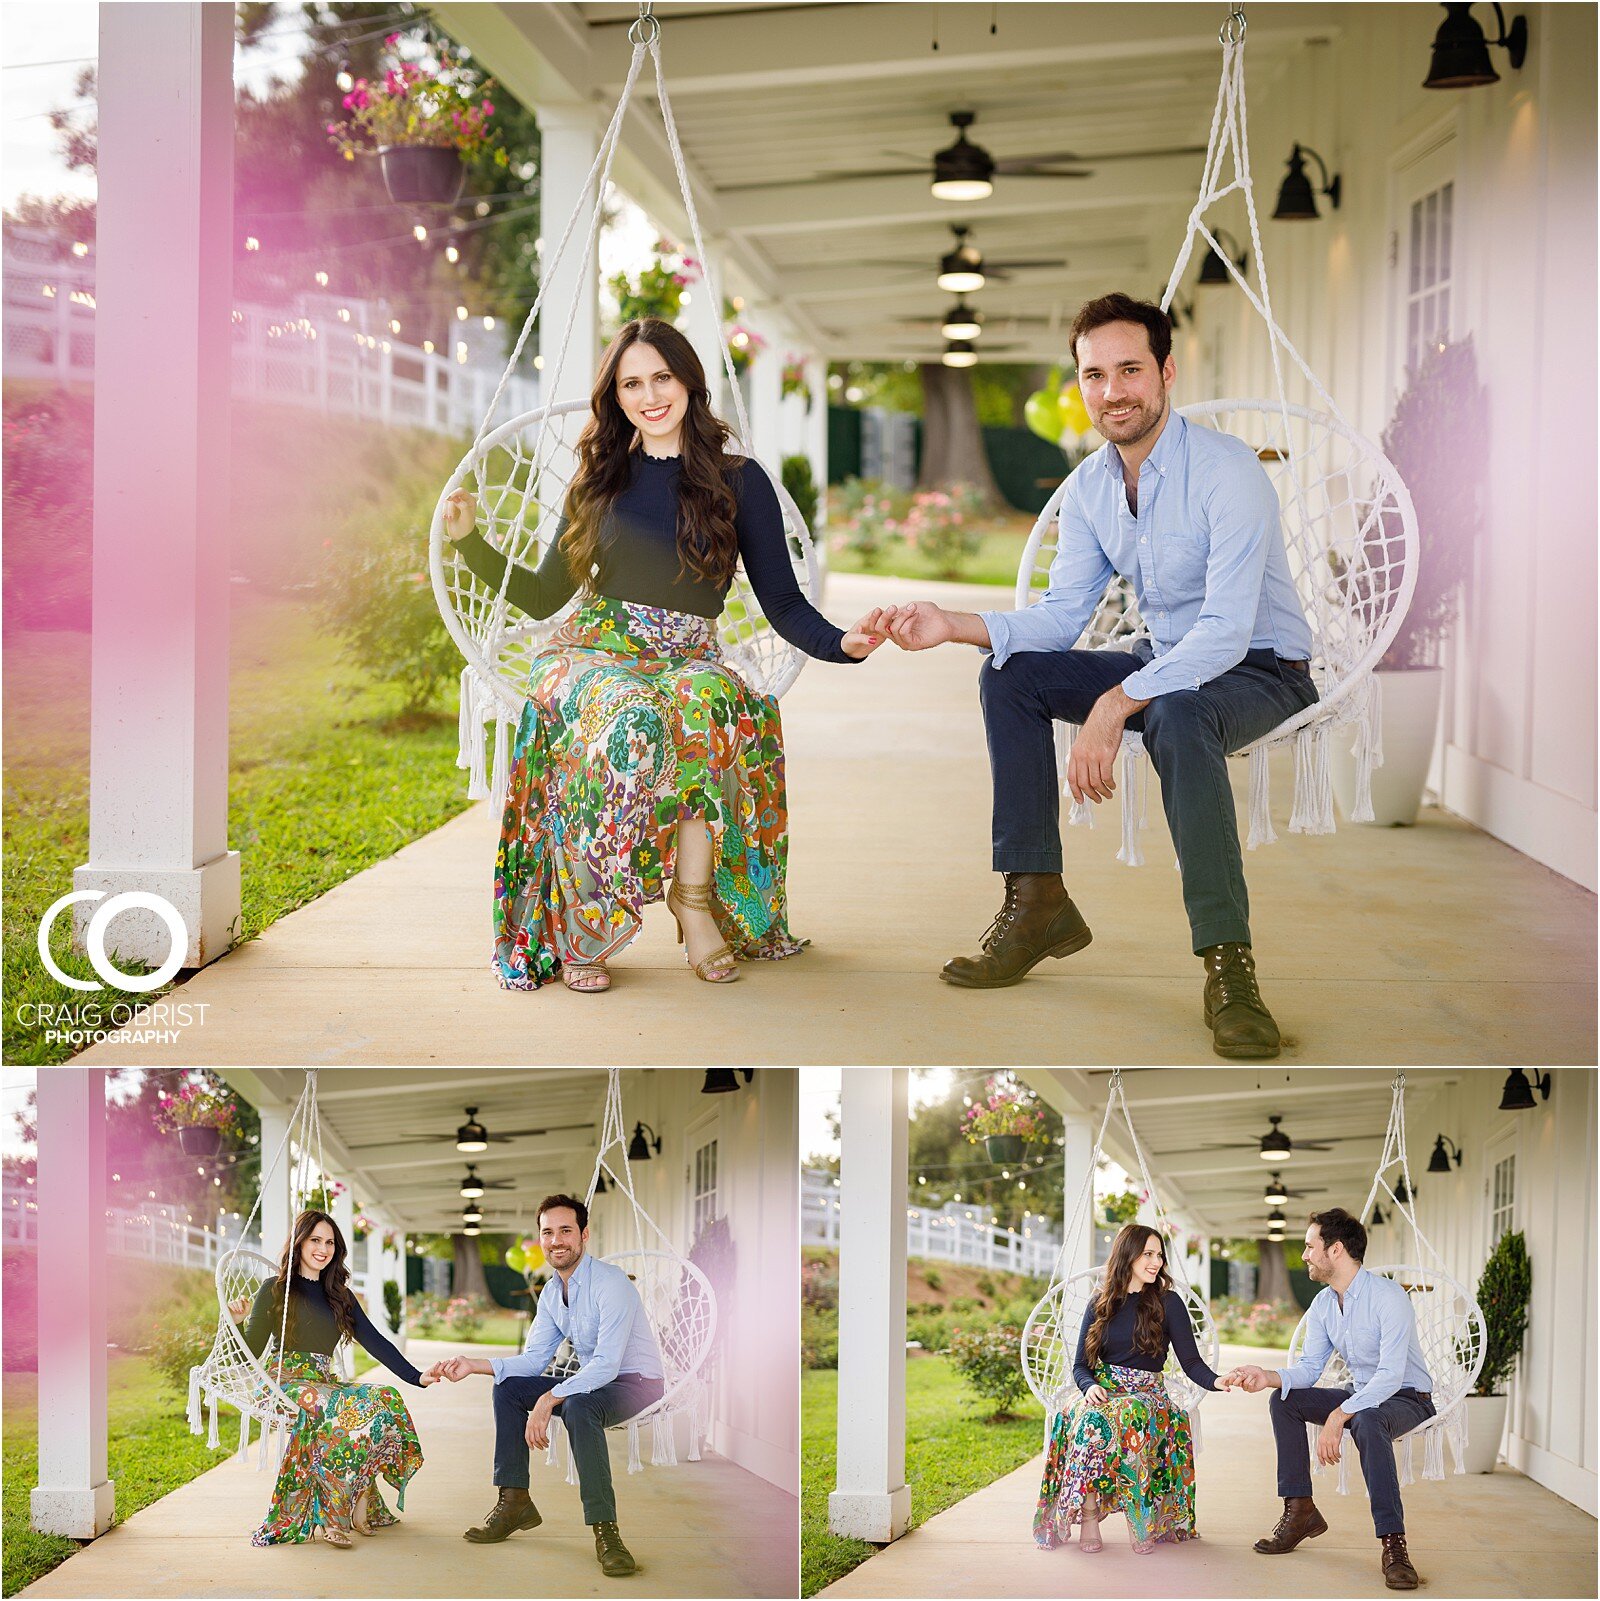 The Barn at Little River Little River Farms Engagement Wedding Portraits Fairy Tale_0010.jpg